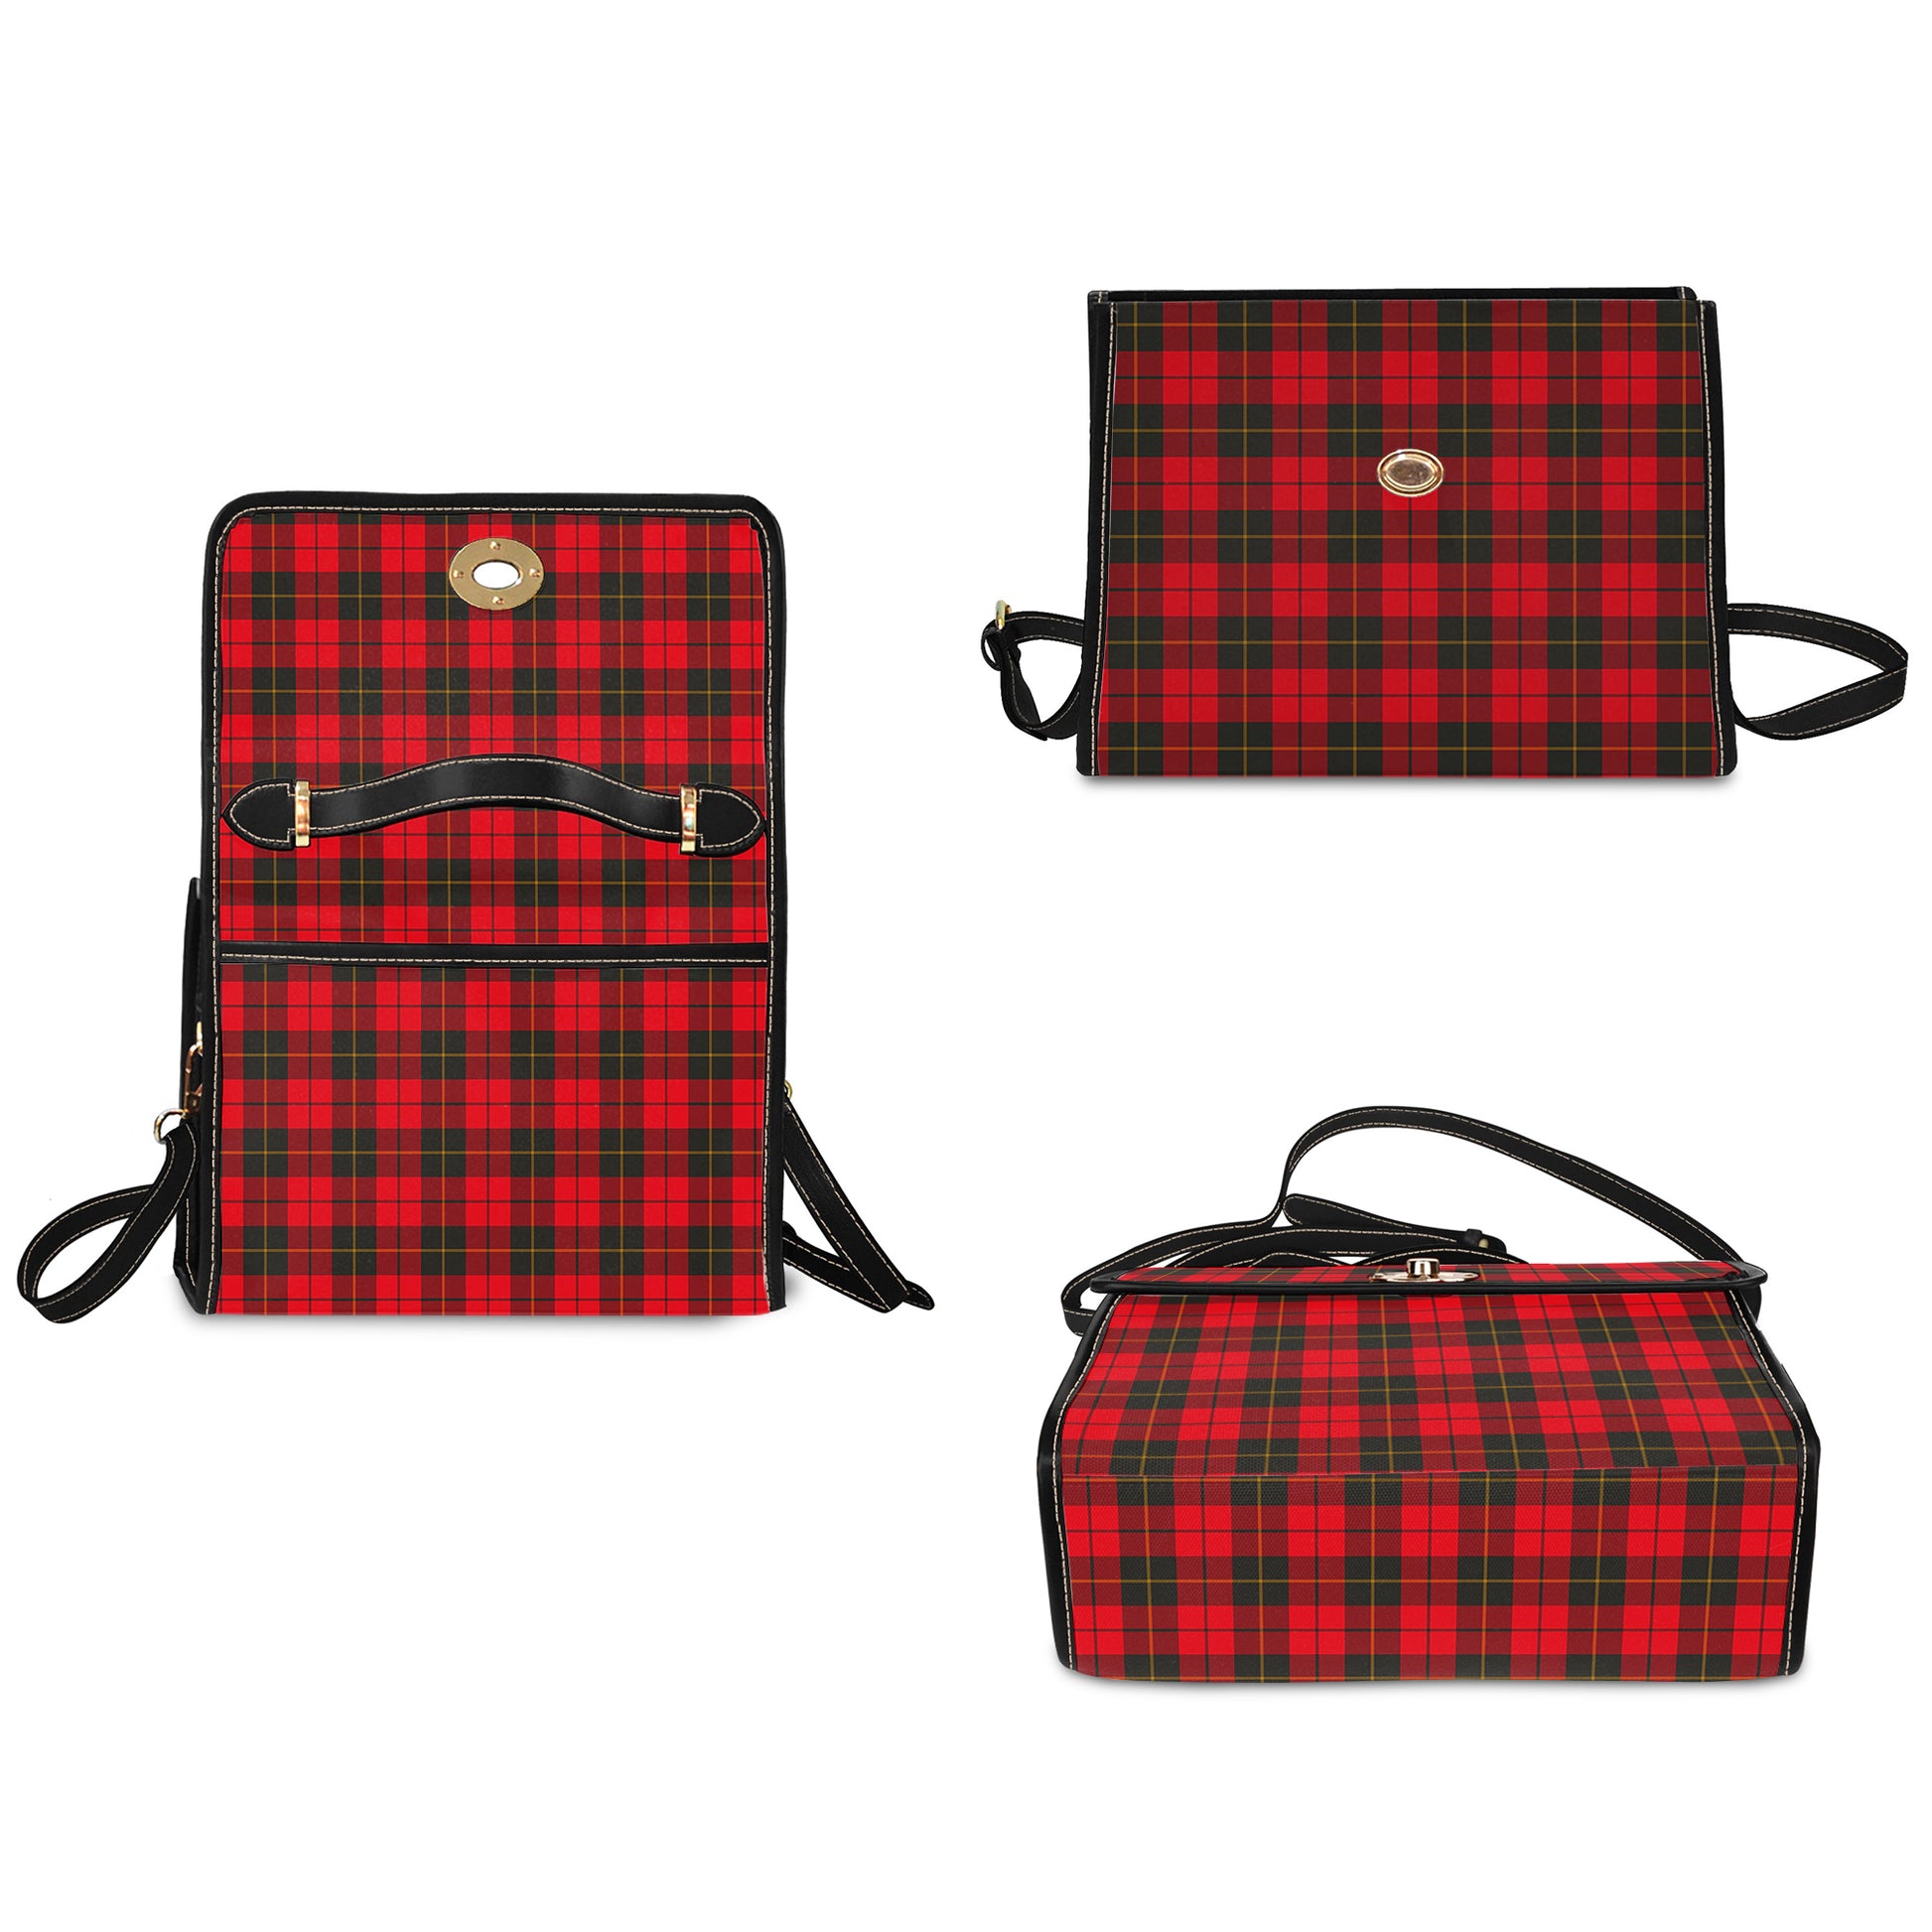 wallace-weathered-tartan-leather-strap-waterproof-canvas-bag